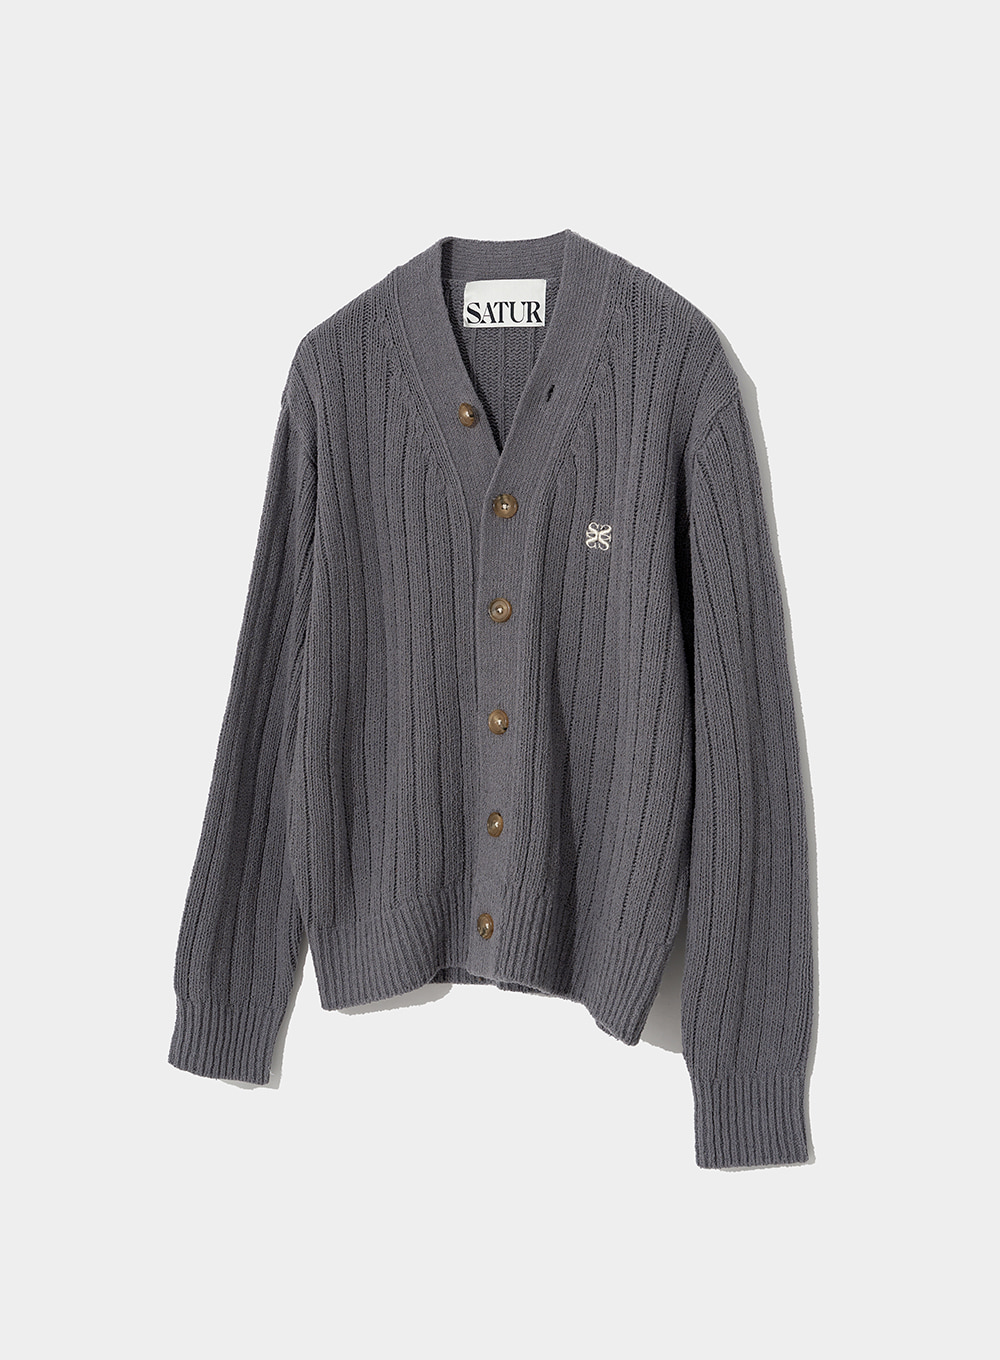 Faro Over Size Boucle Cardigan - Charcoal Gray